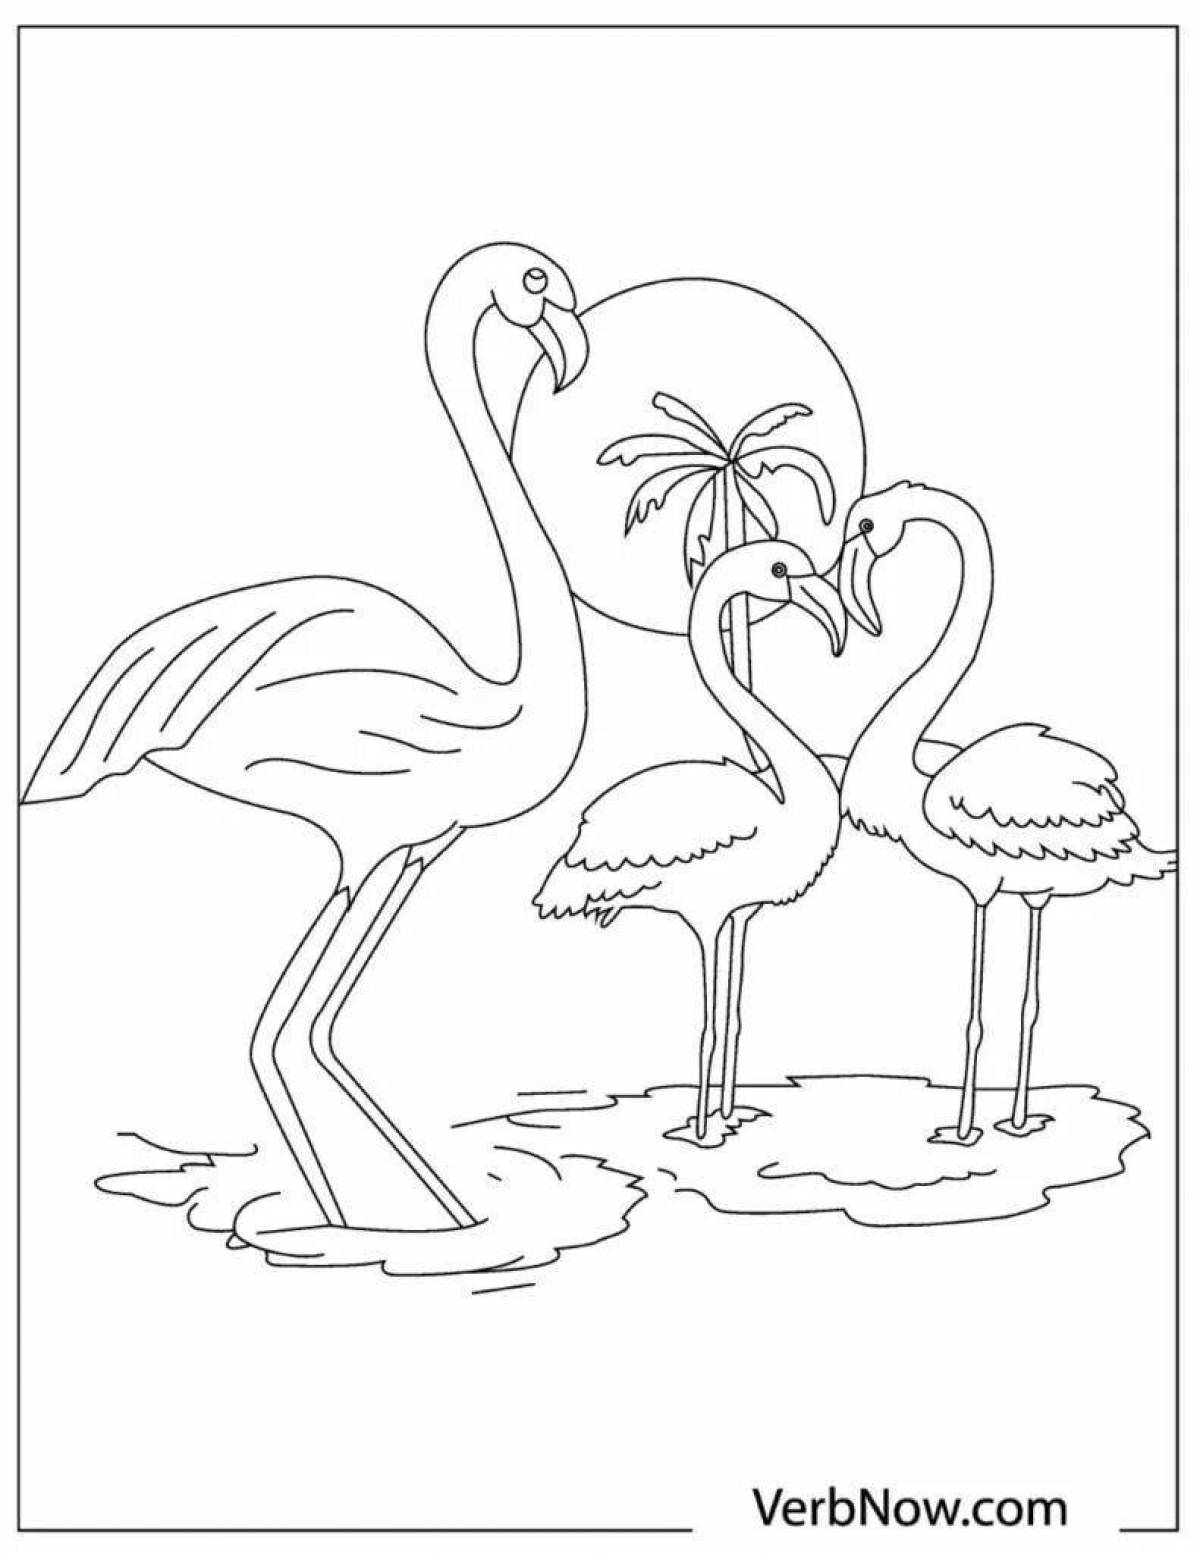 Fabulous flamingo coloring pages for girls